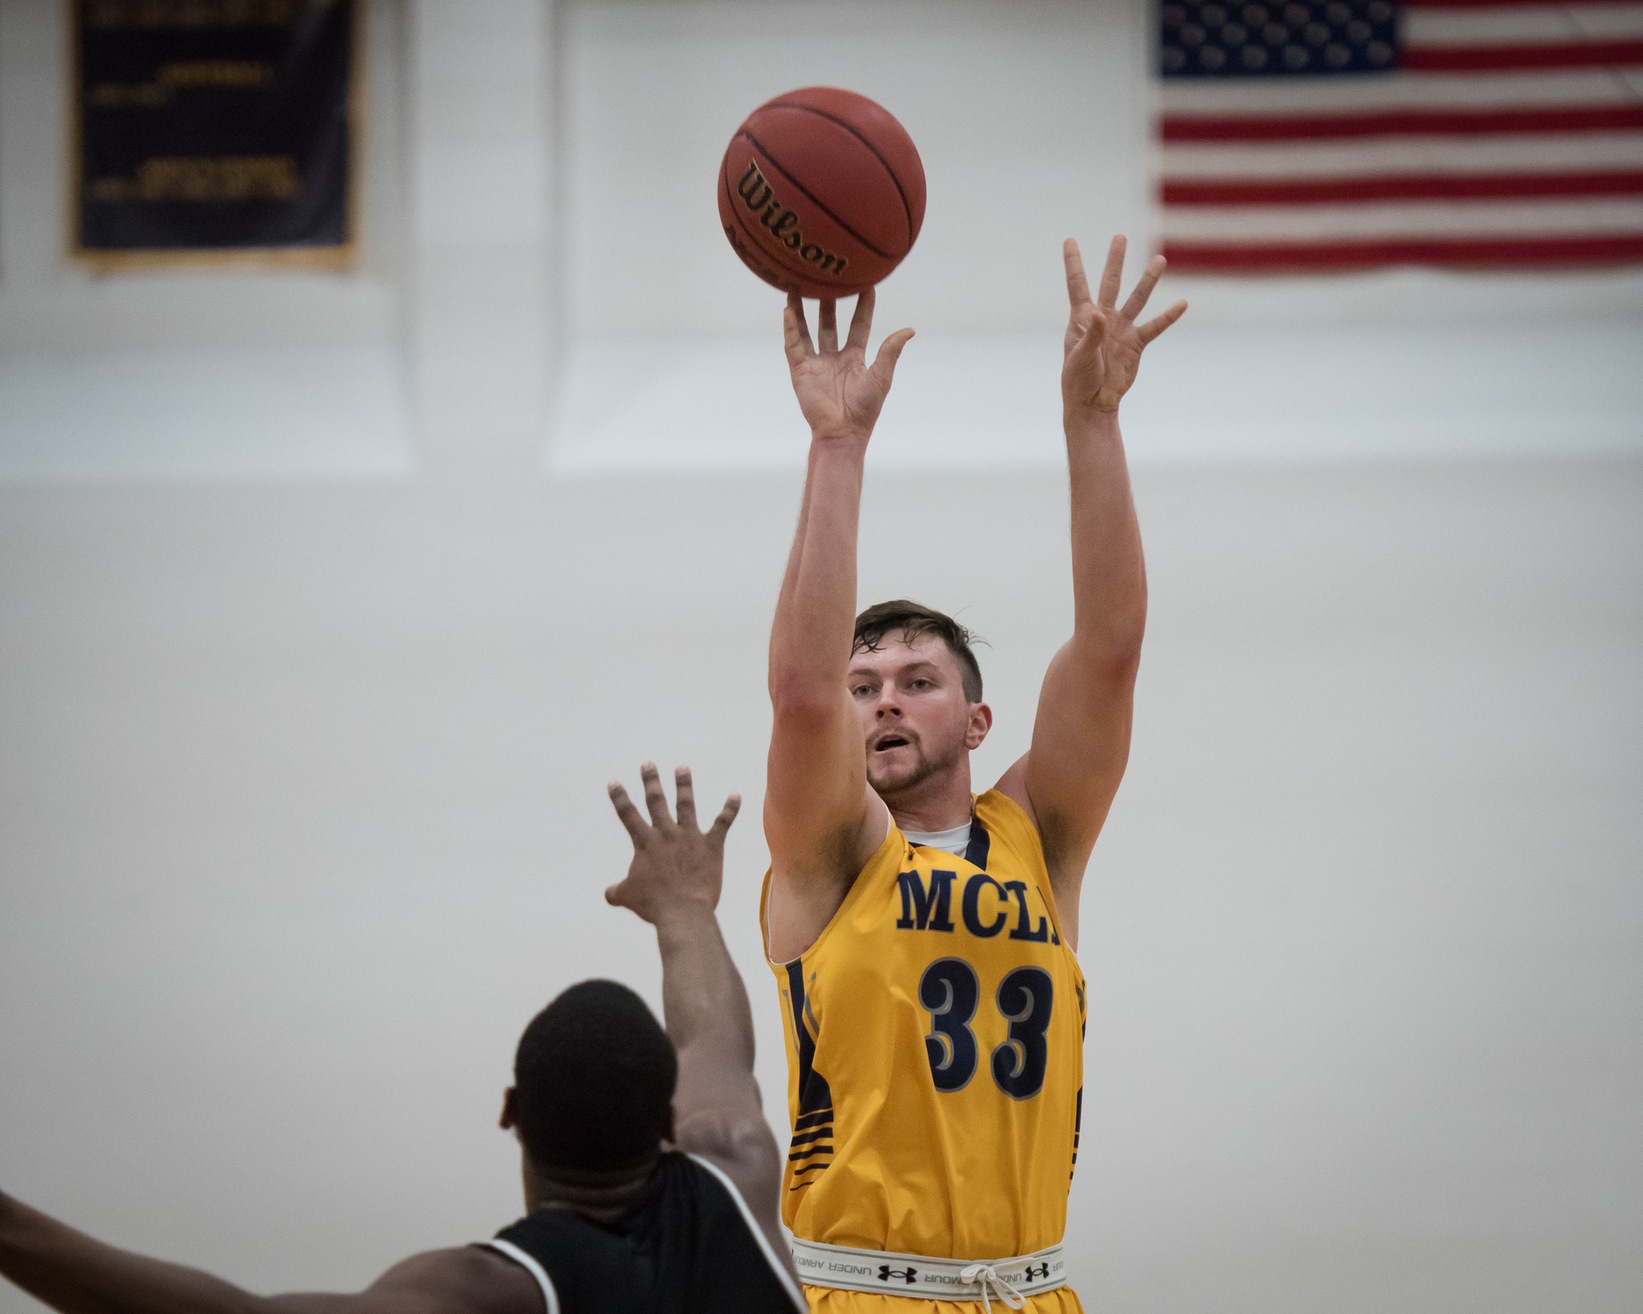 Bird nets career high 24 points but Trailblazers fall to Framingham State 70-60